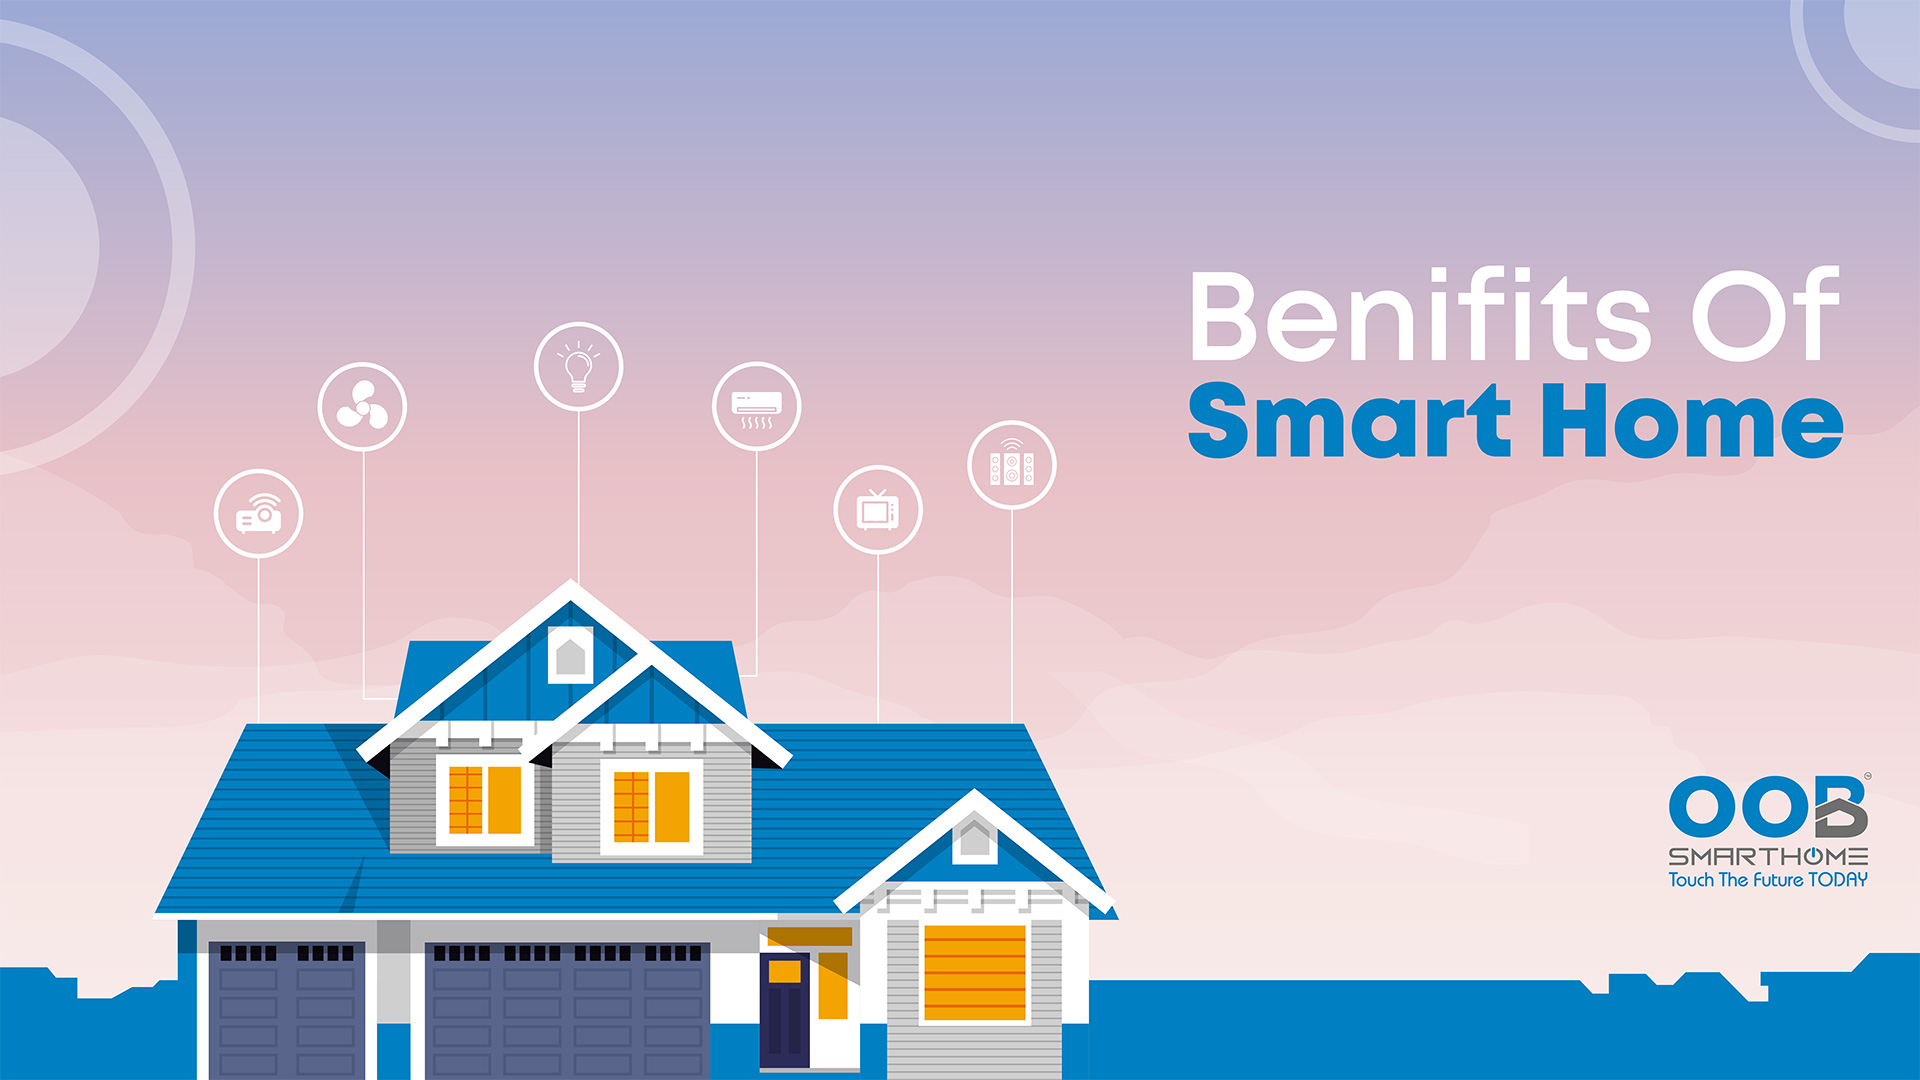 What are the Benefits of a Smart Home?